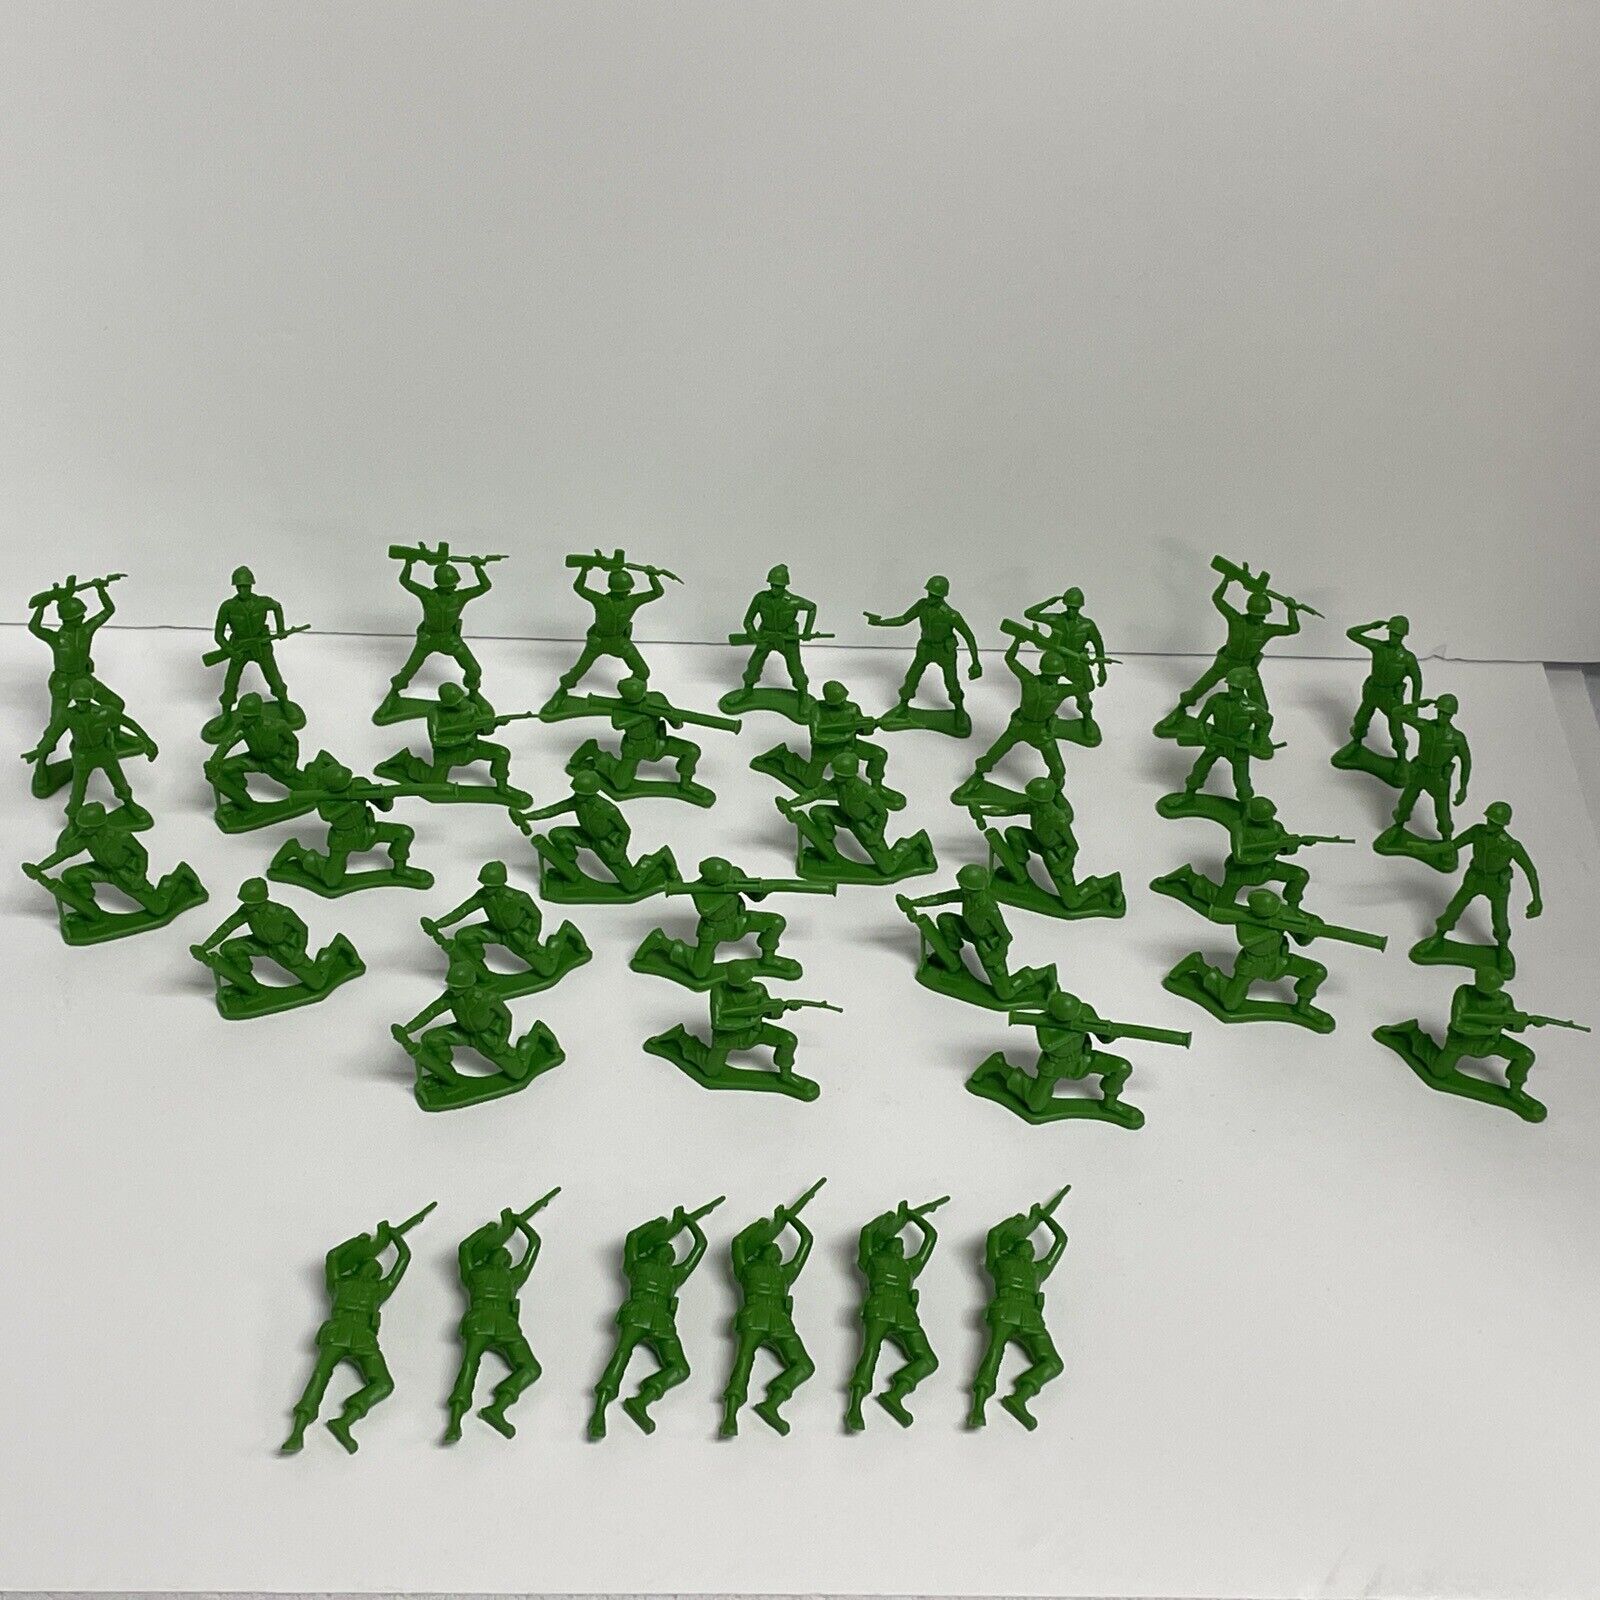 Toy Story Green Army Men Disney Pixar Plastic Soldiers lot of 39 pcs assorted